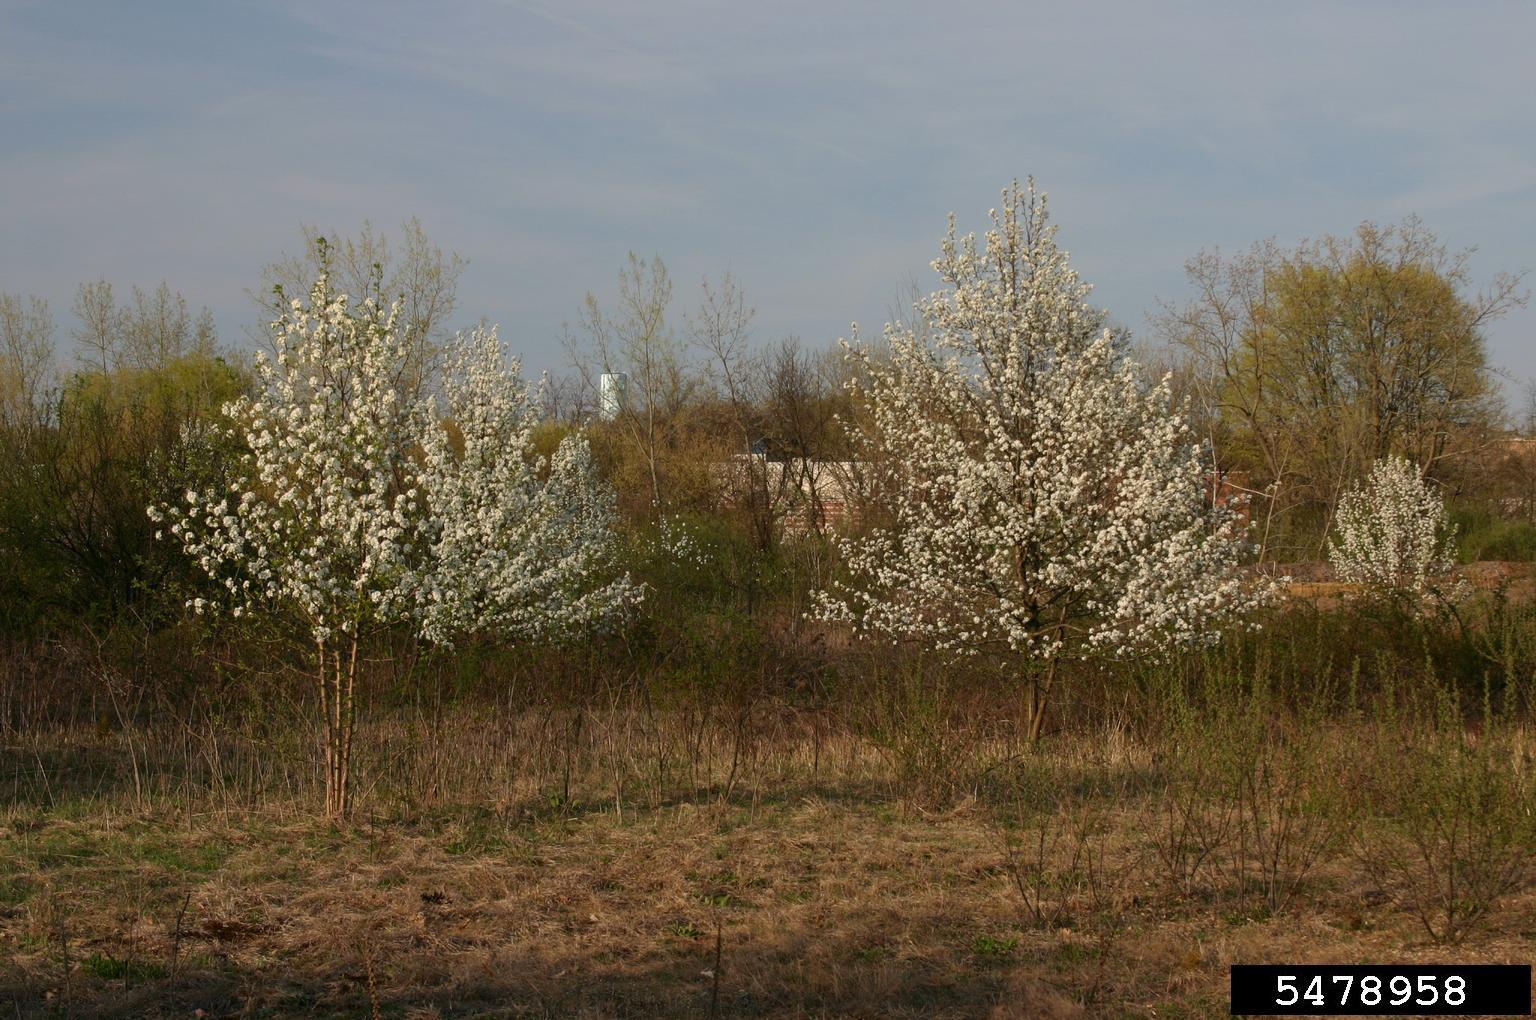 Invasive Bradford pear trees in bloom with white flowers